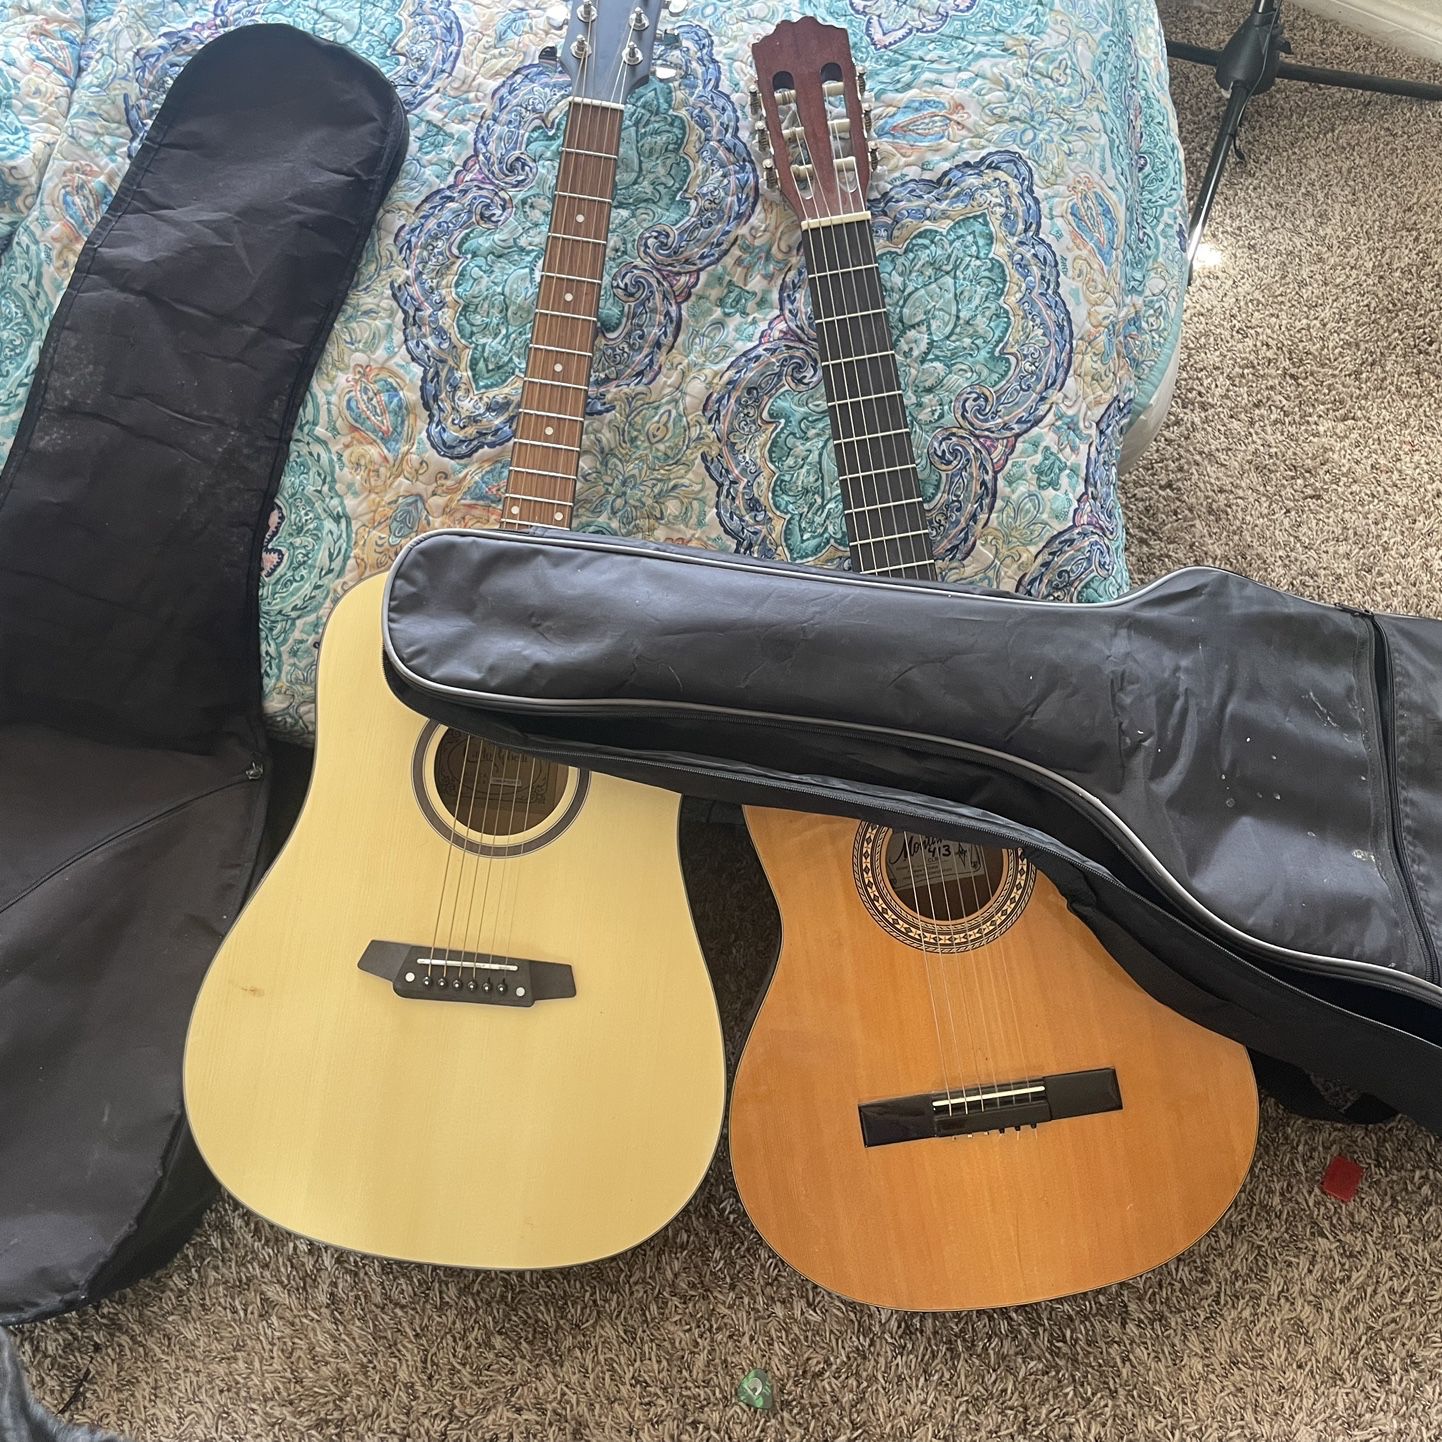 Two New Guitars: One acoustic(dark brown), One acoustic/bass(light brown)